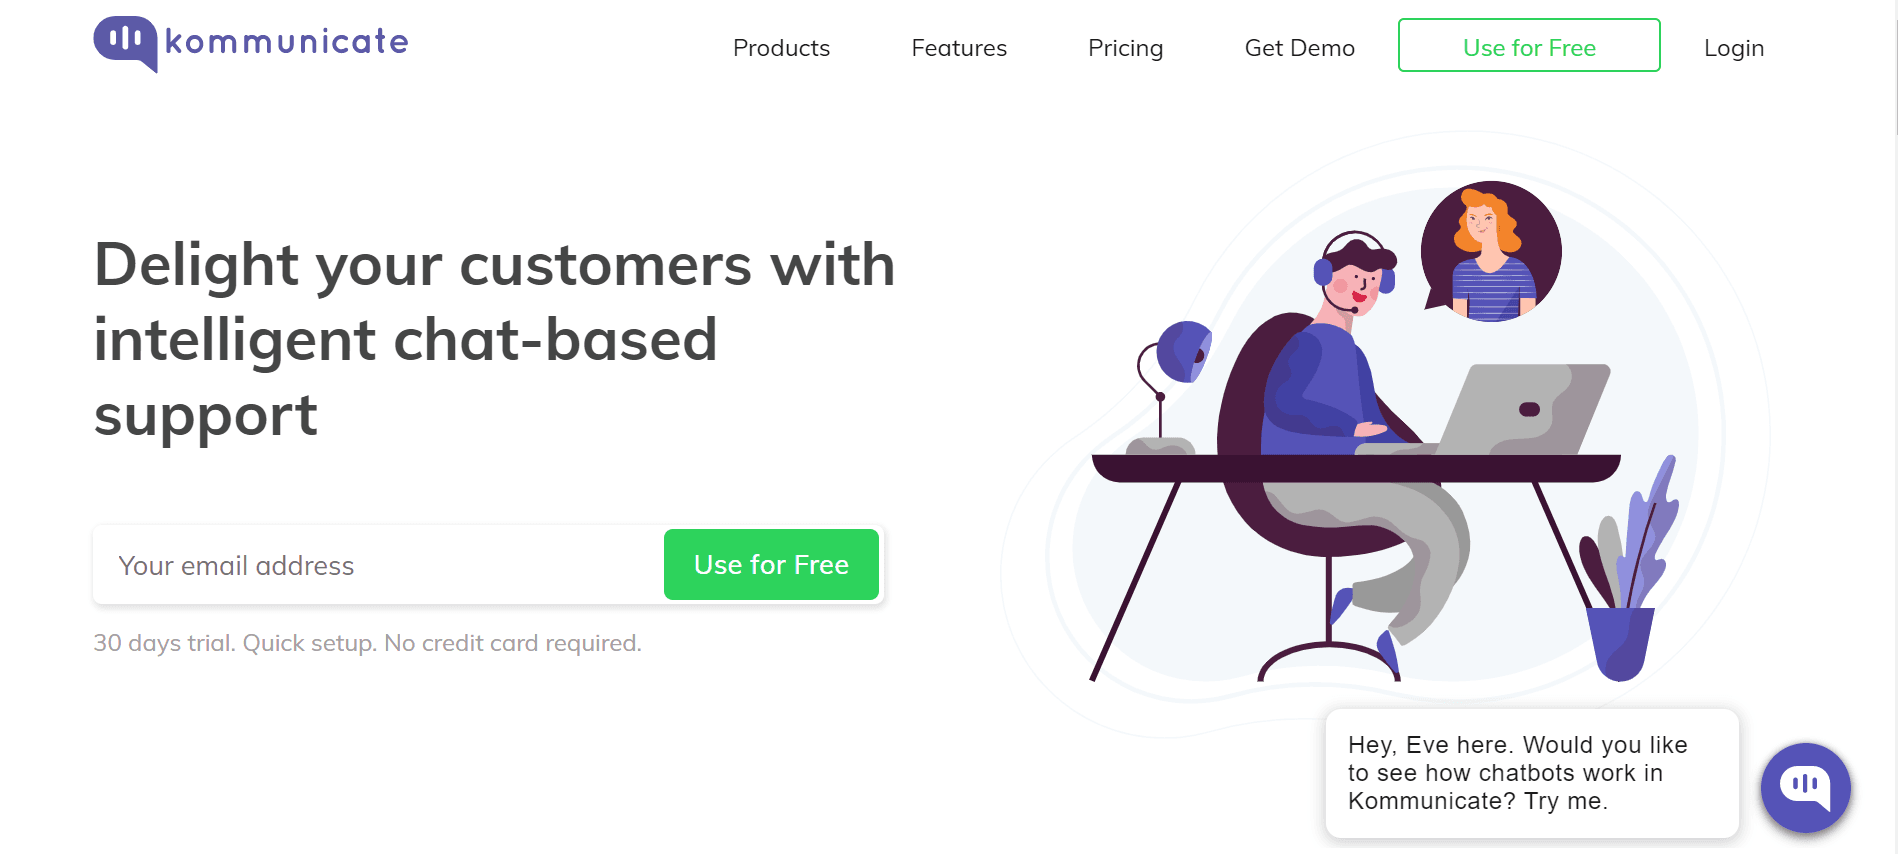 [CASE STUDY] Going Product-Led Growth: How Kommunicate.io drives product adoption without a sales team